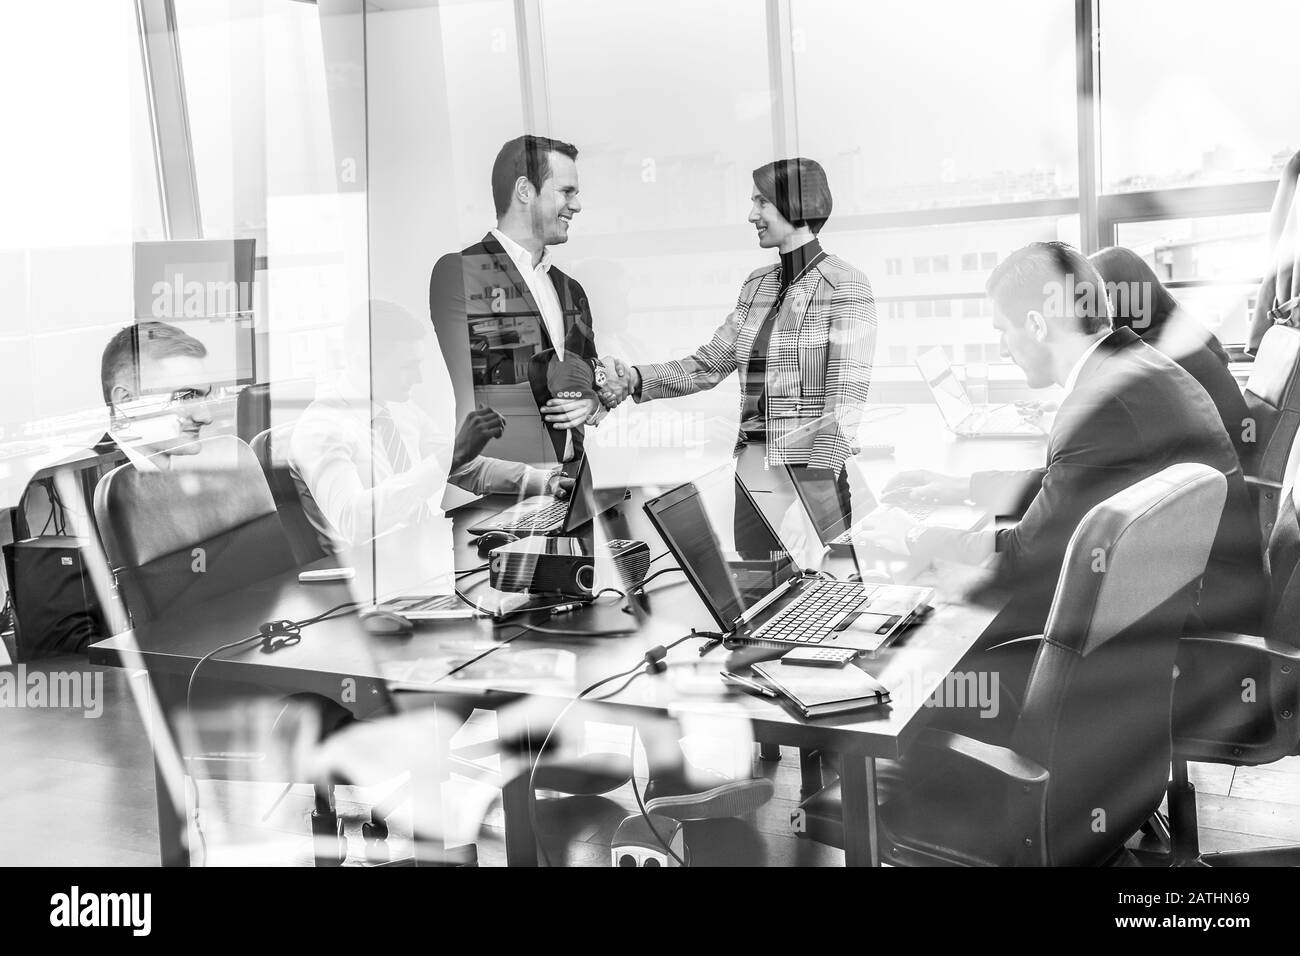 Confident business people shaking hands in moder corporate office. Stock Photo